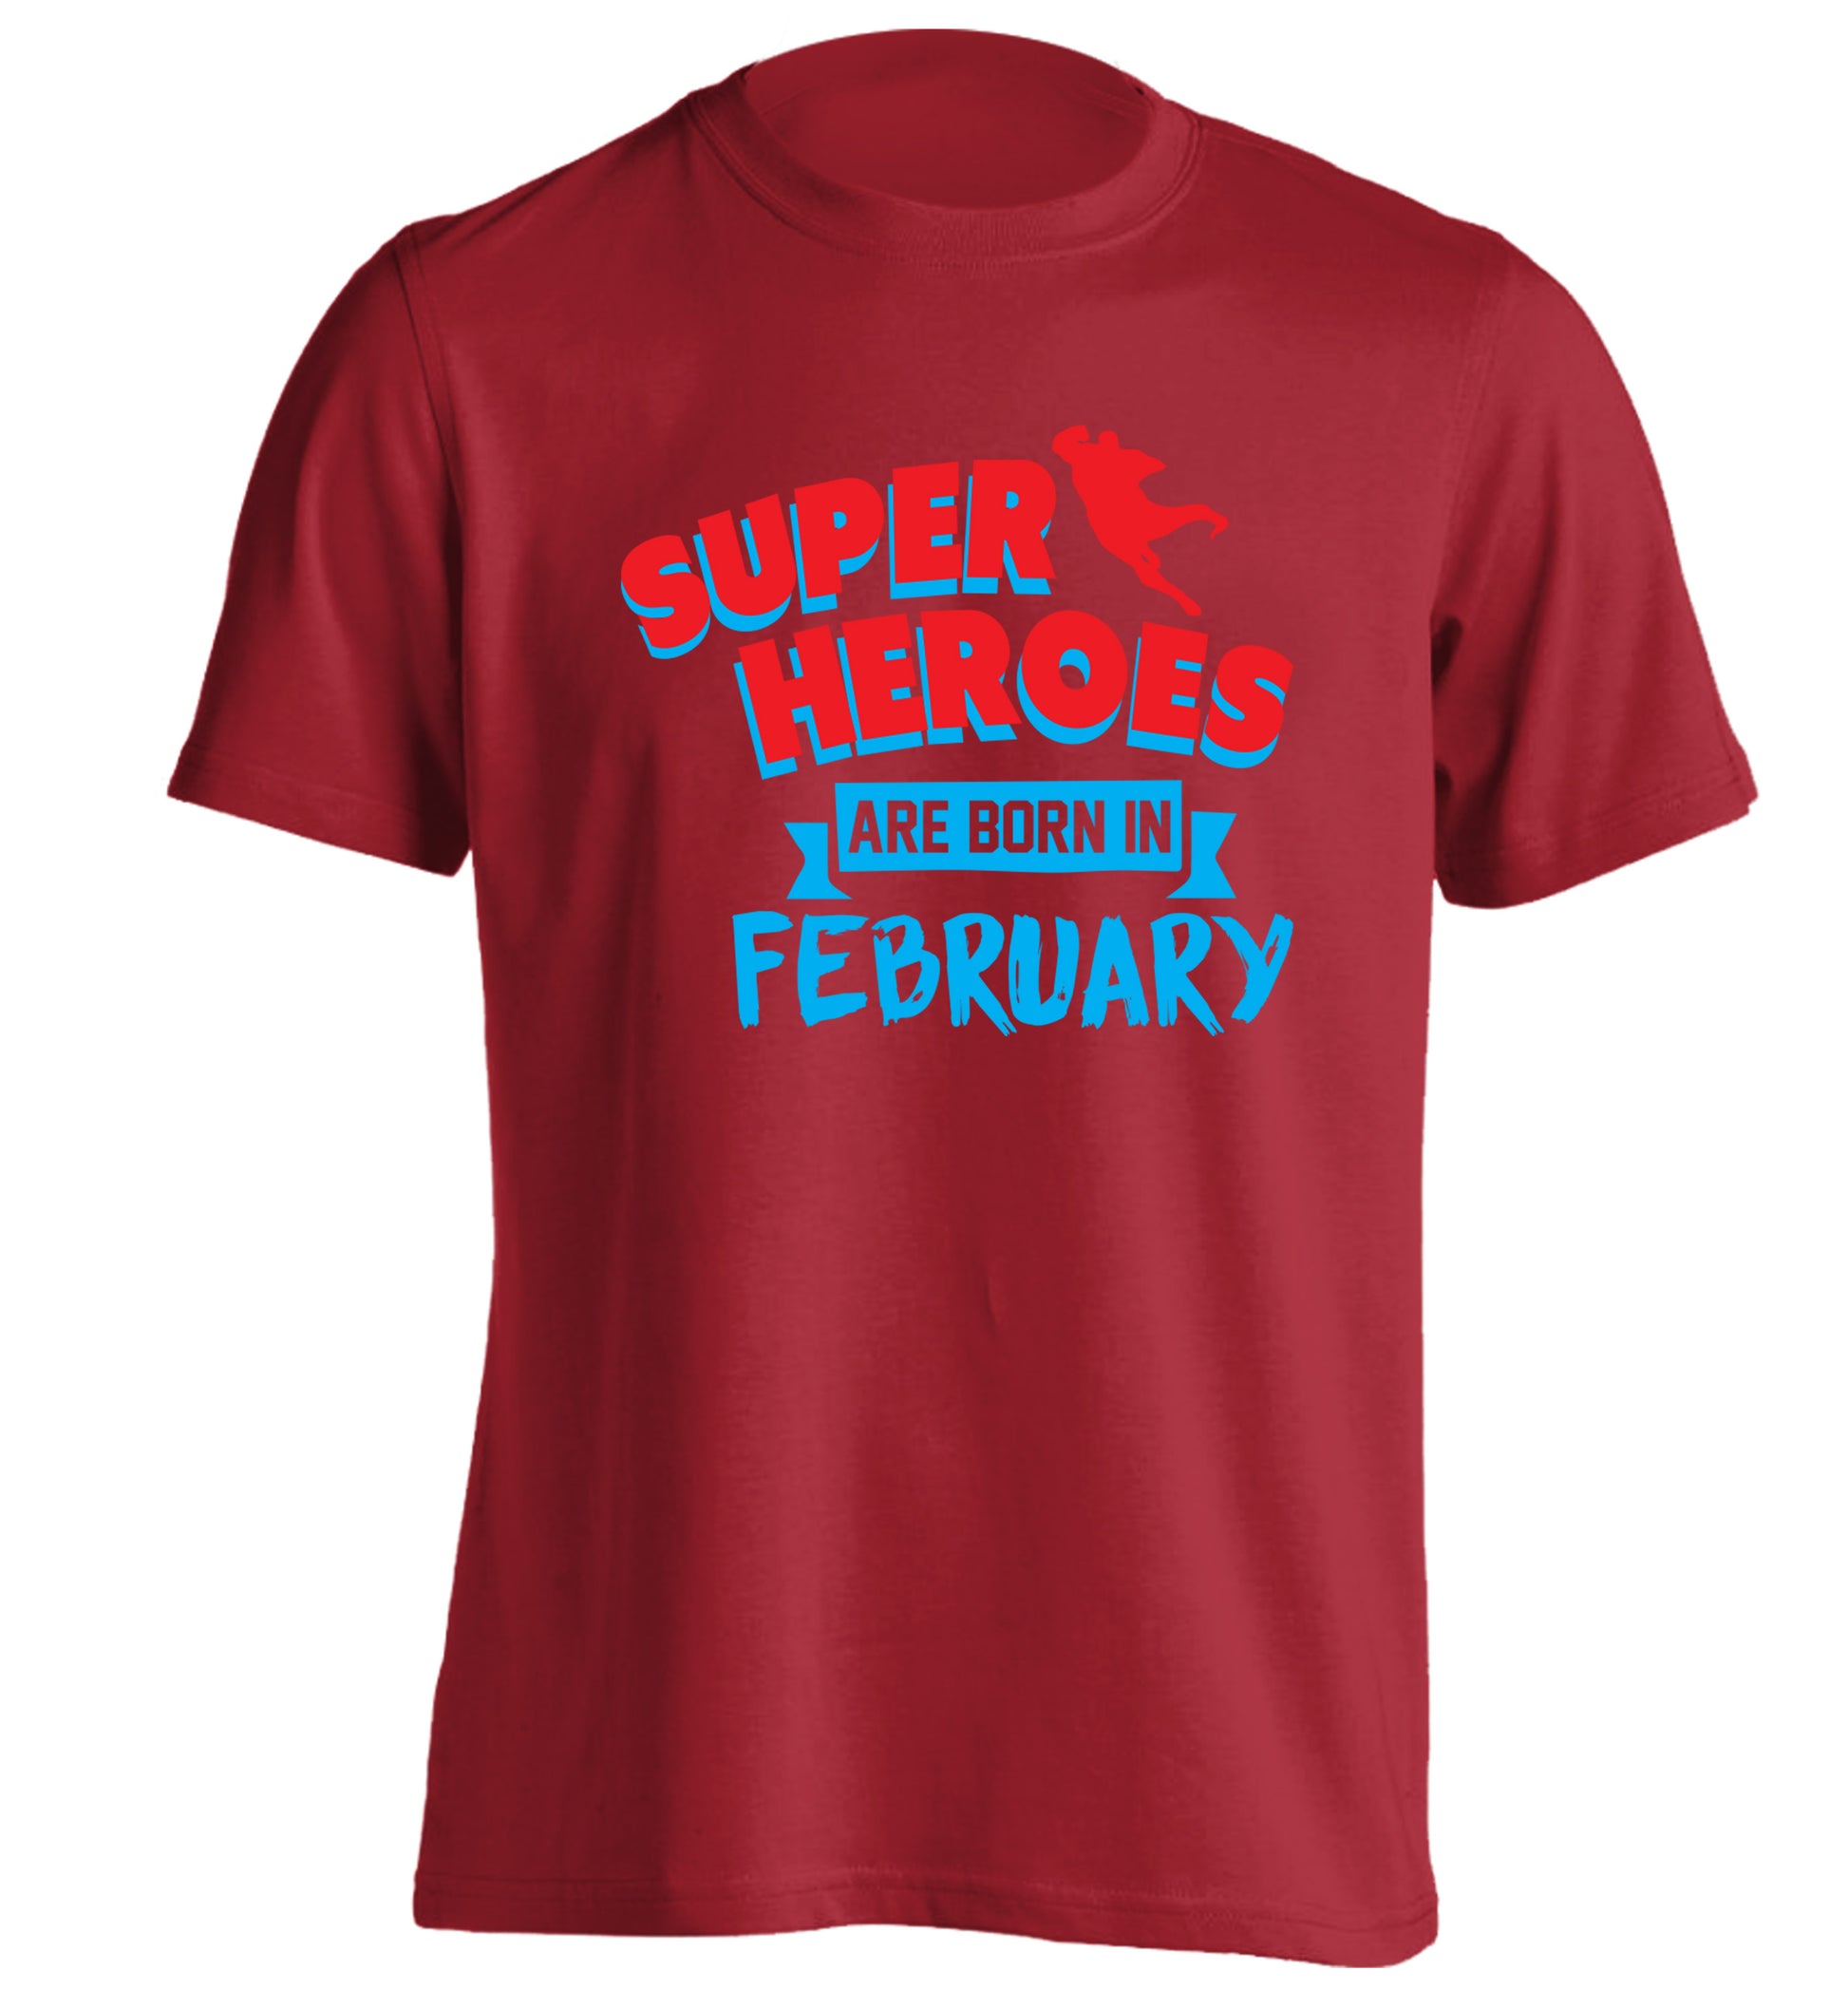 superheroes are born in February adults unisex red Tshirt 2XL